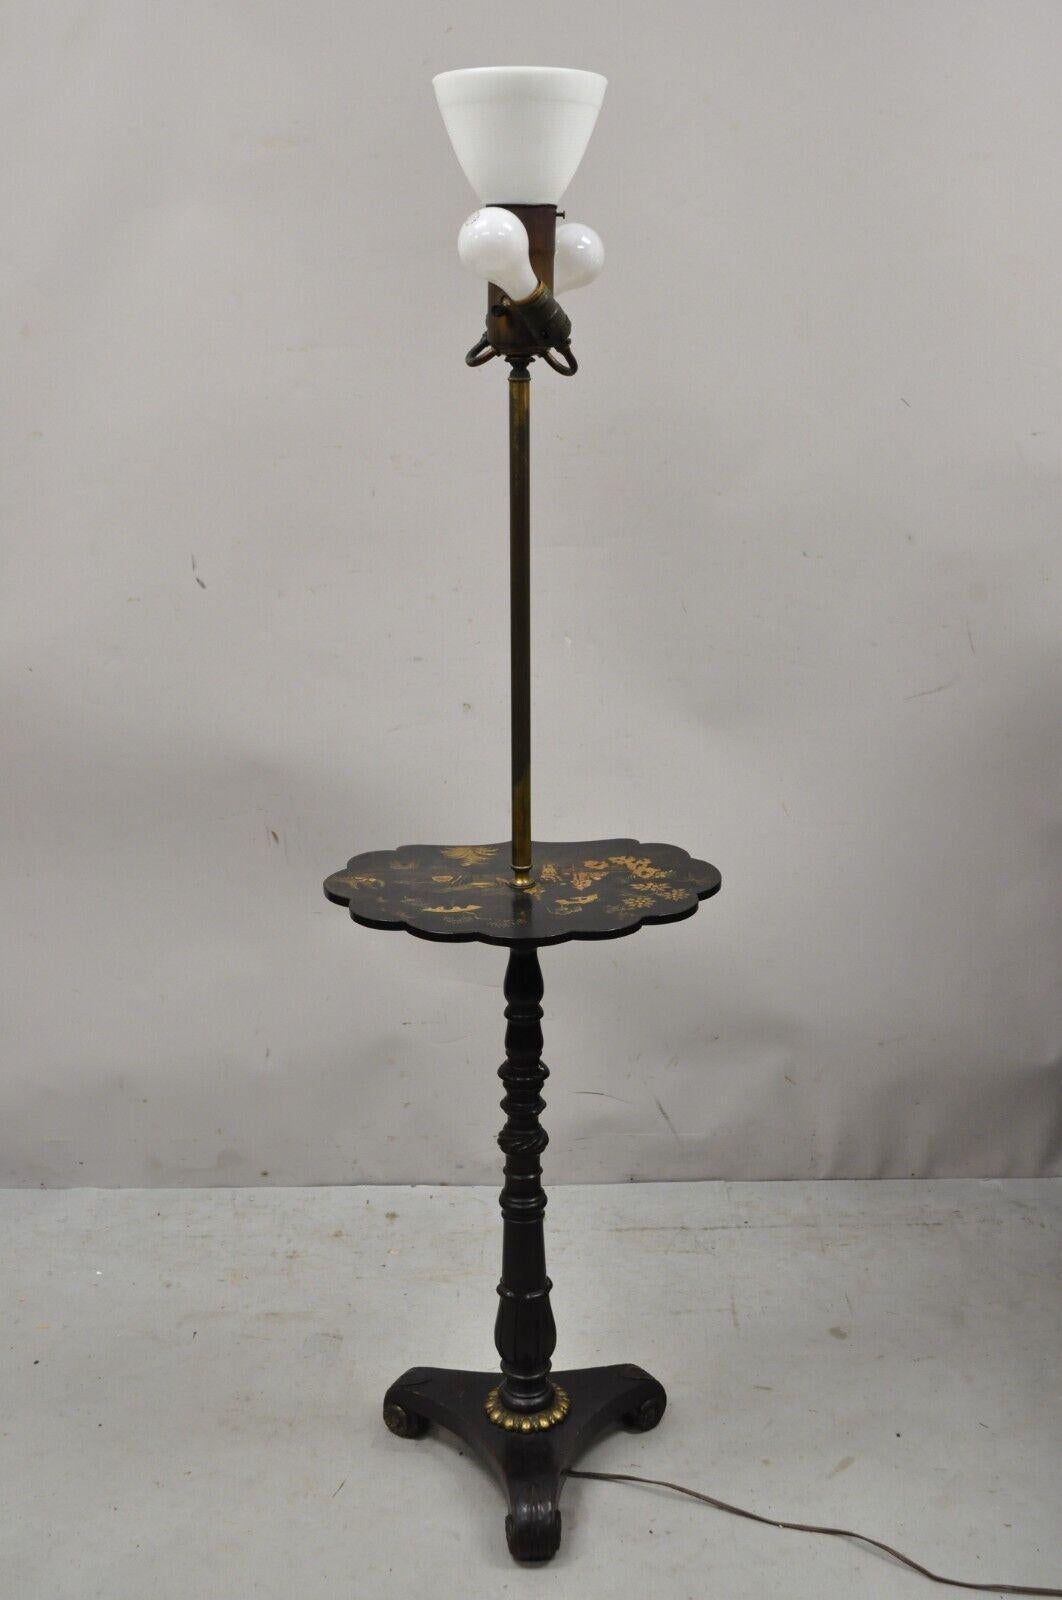 Antique English Victorian chinoiserie lacquered floor lamp with scalloped table. Item features a carved mahogany tripod pedestal base, gold gilt accents, hand painted scalloped edge top with Asian scenes, milk glass light diffuser. Circa Early